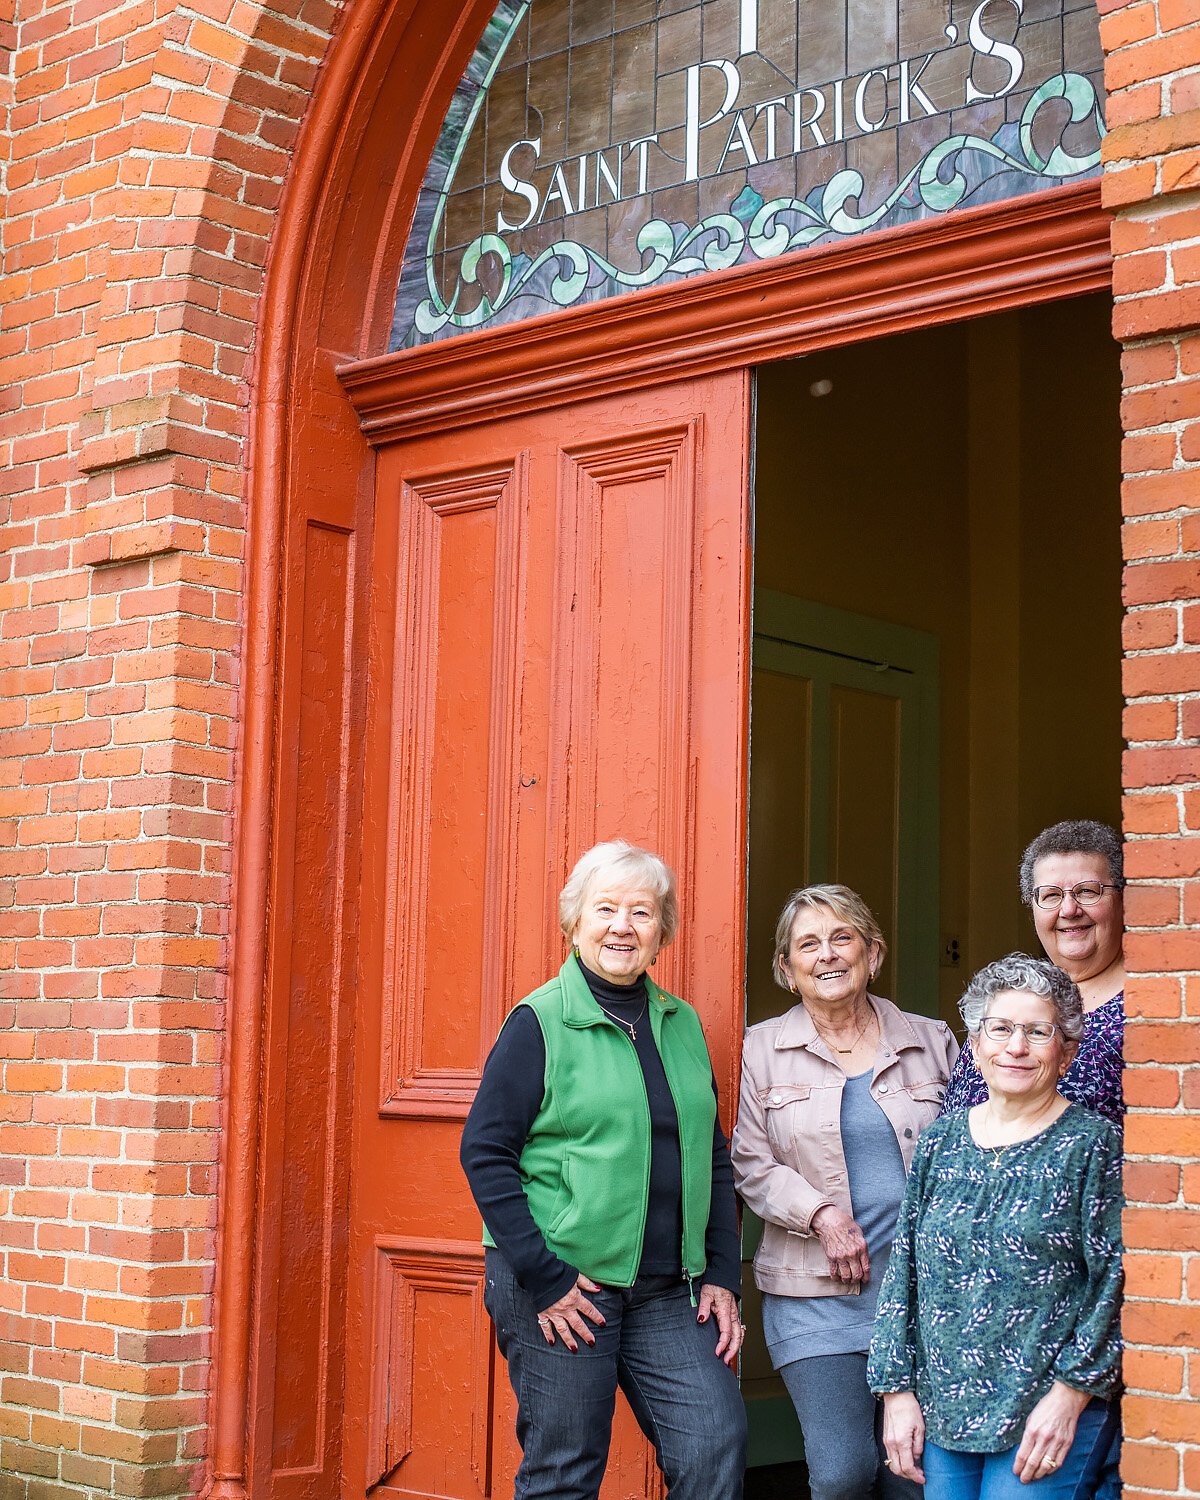 The volunteer group, Friends of St. Patrick, work to keep the history of the church alive.